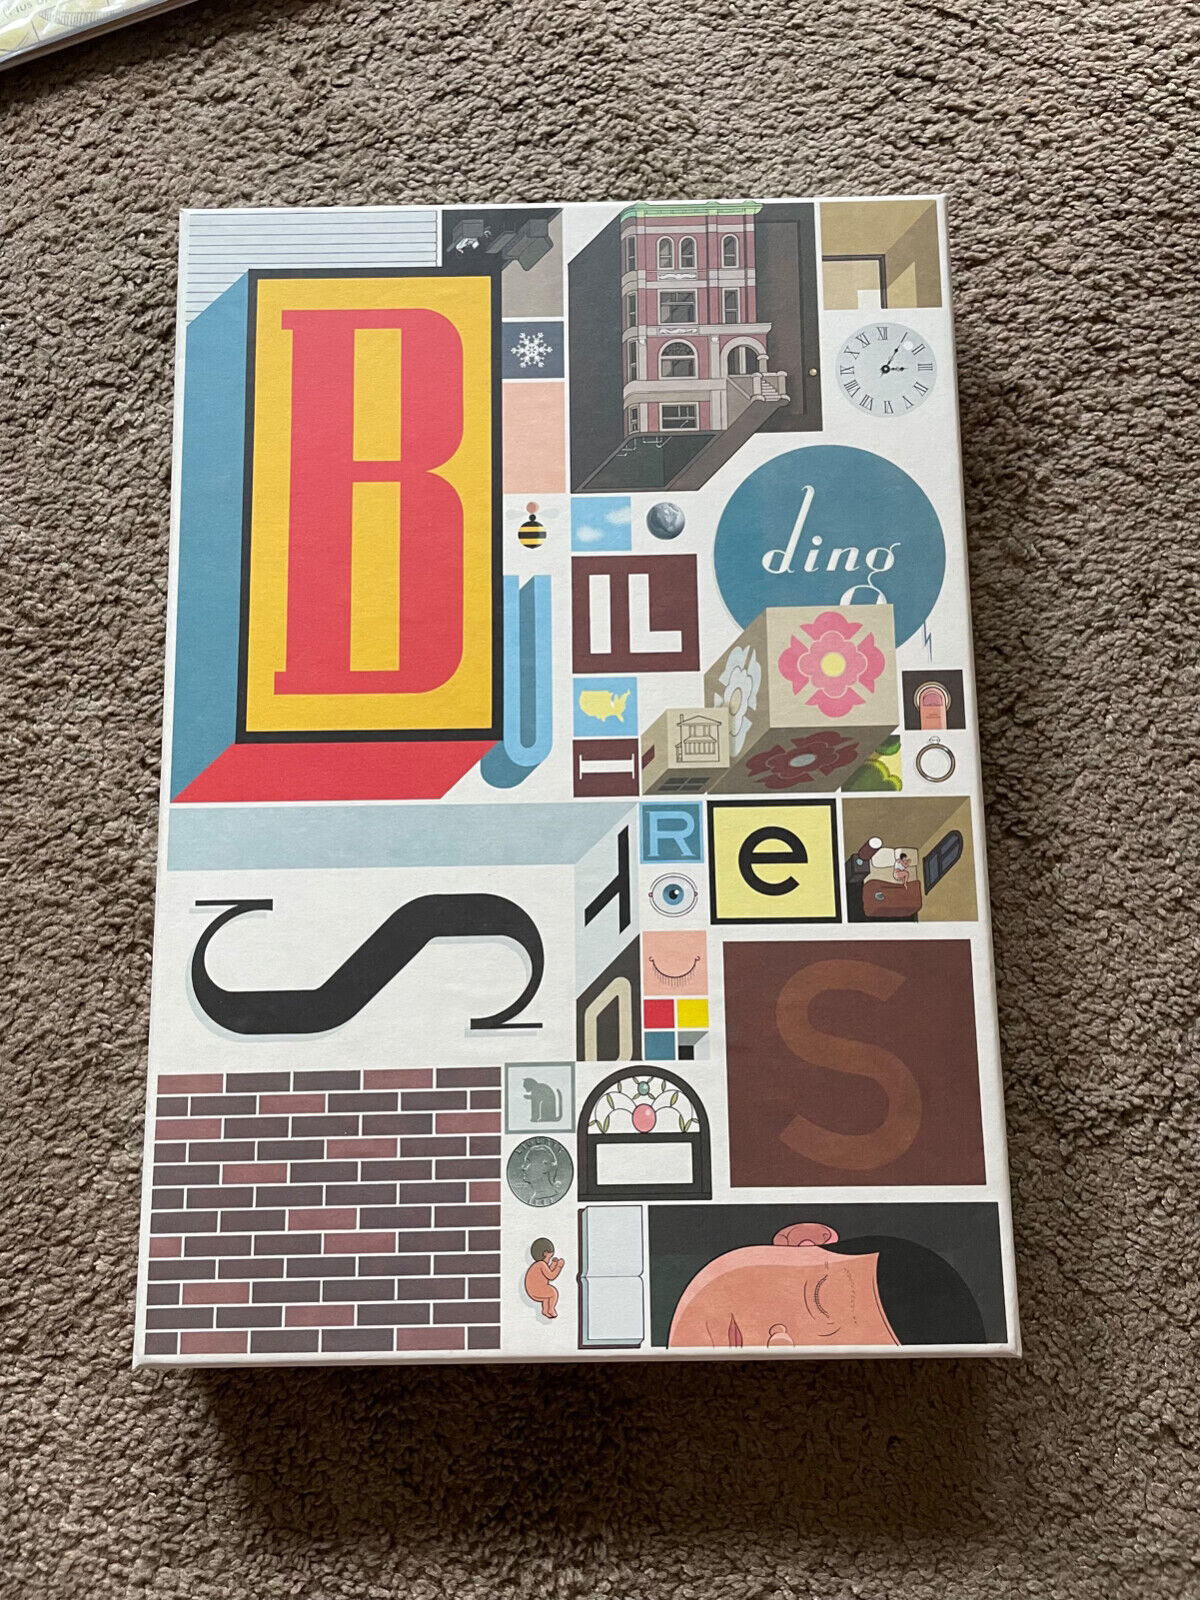 Building Stories Graphic Novel Hardcover Books Chris Ware Pictographic Fiction 